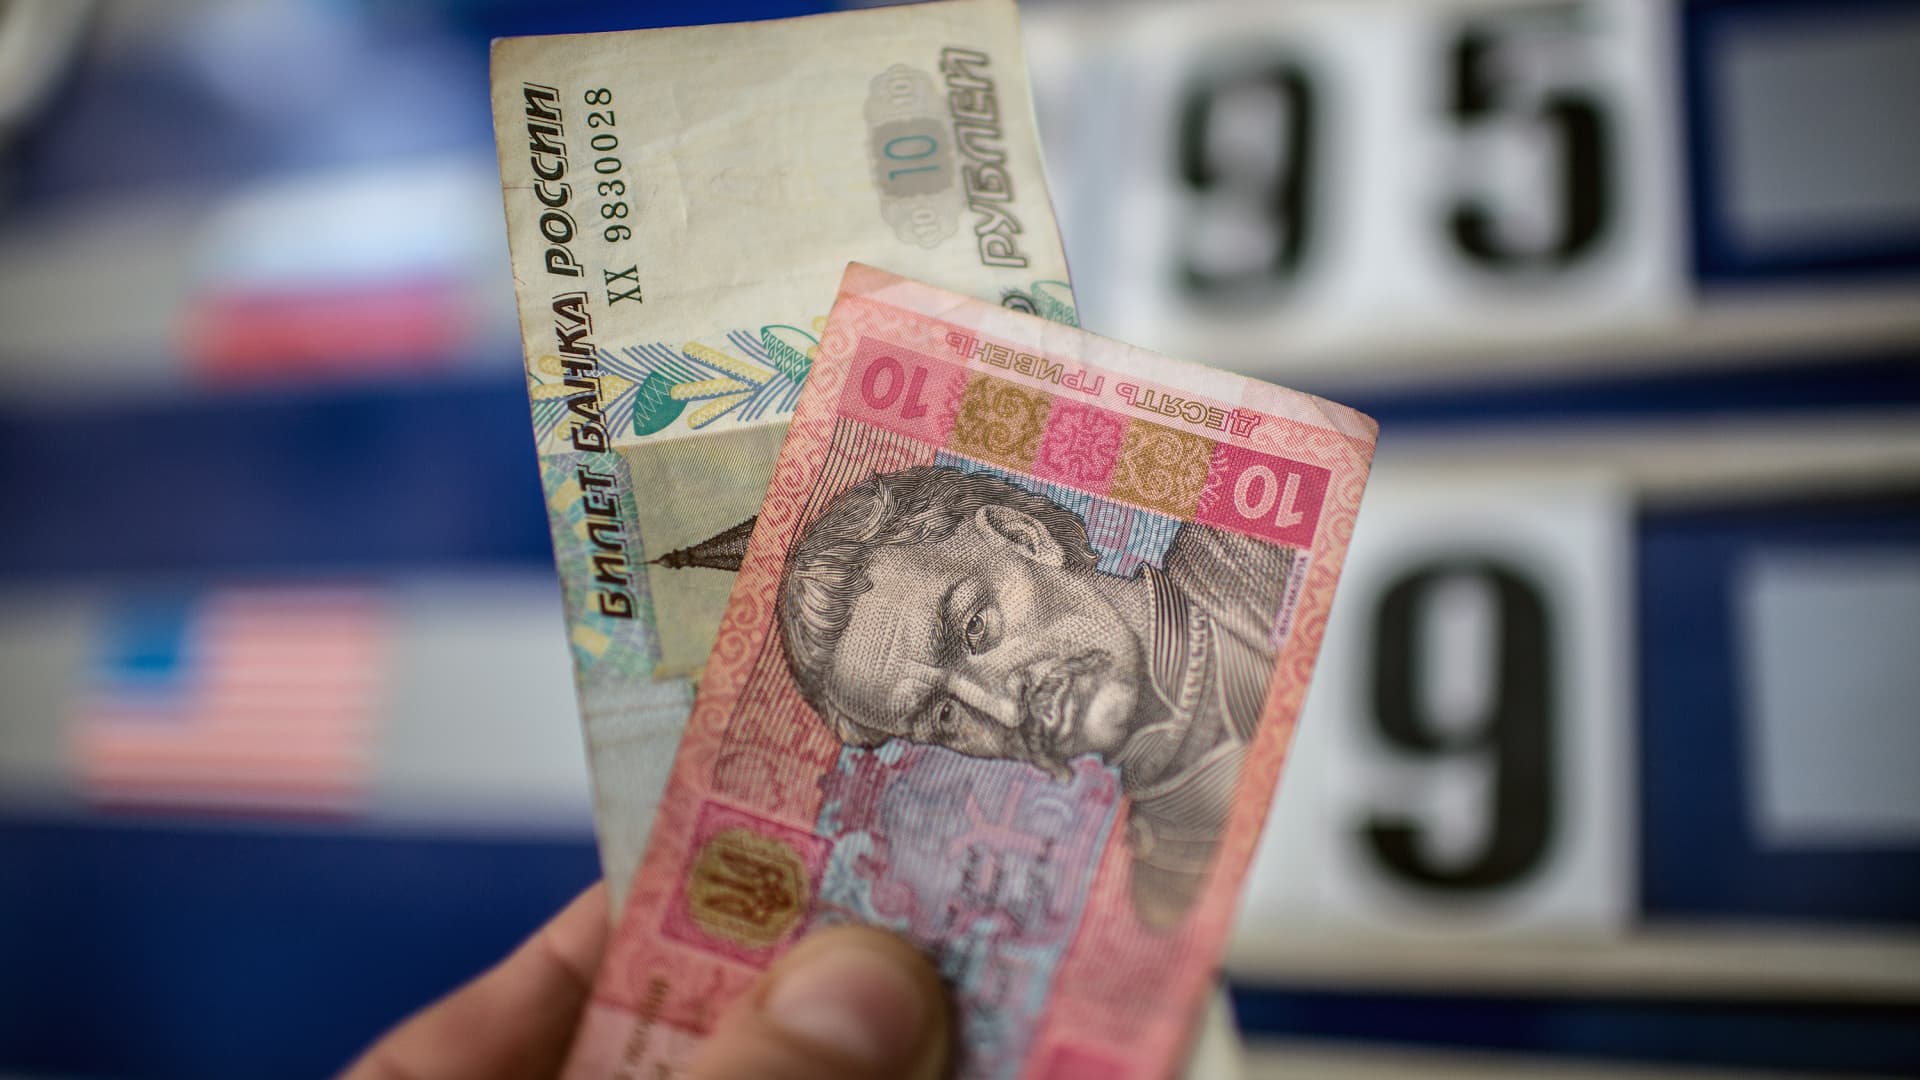 A man holds up Russian ruble and Ukrainian hryvnia notes on 18 March 2014.